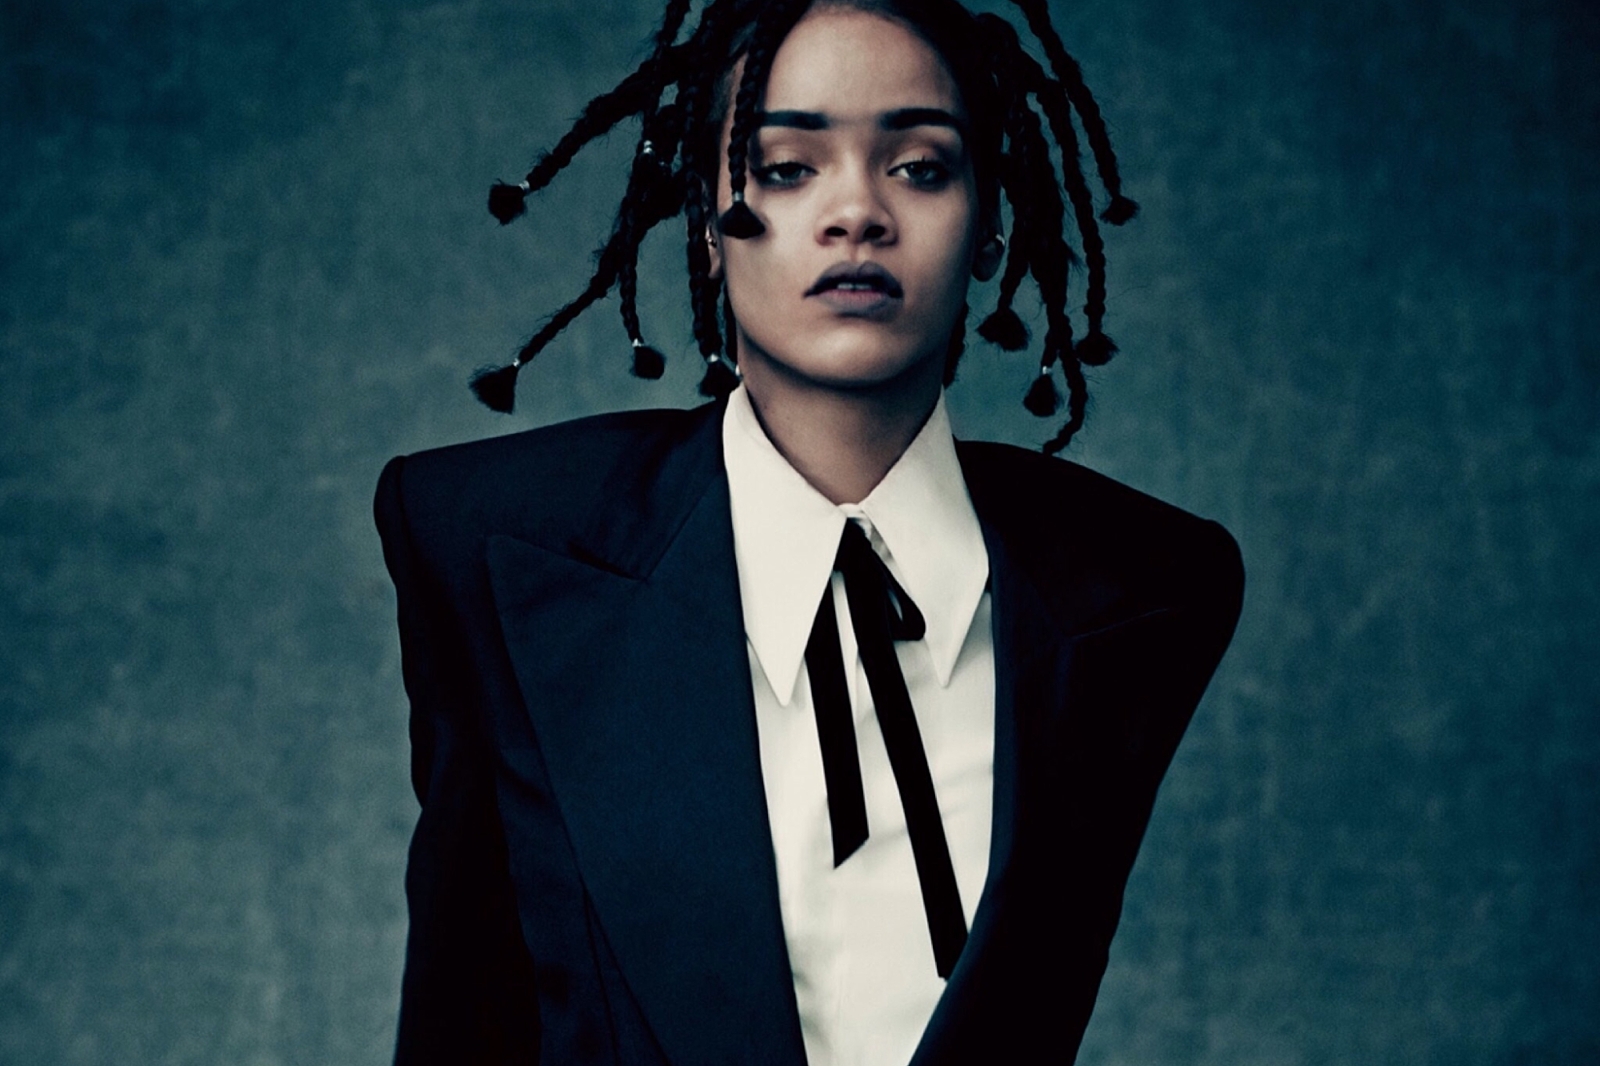 Rihanna to headline this year's Super Bowl halftime show